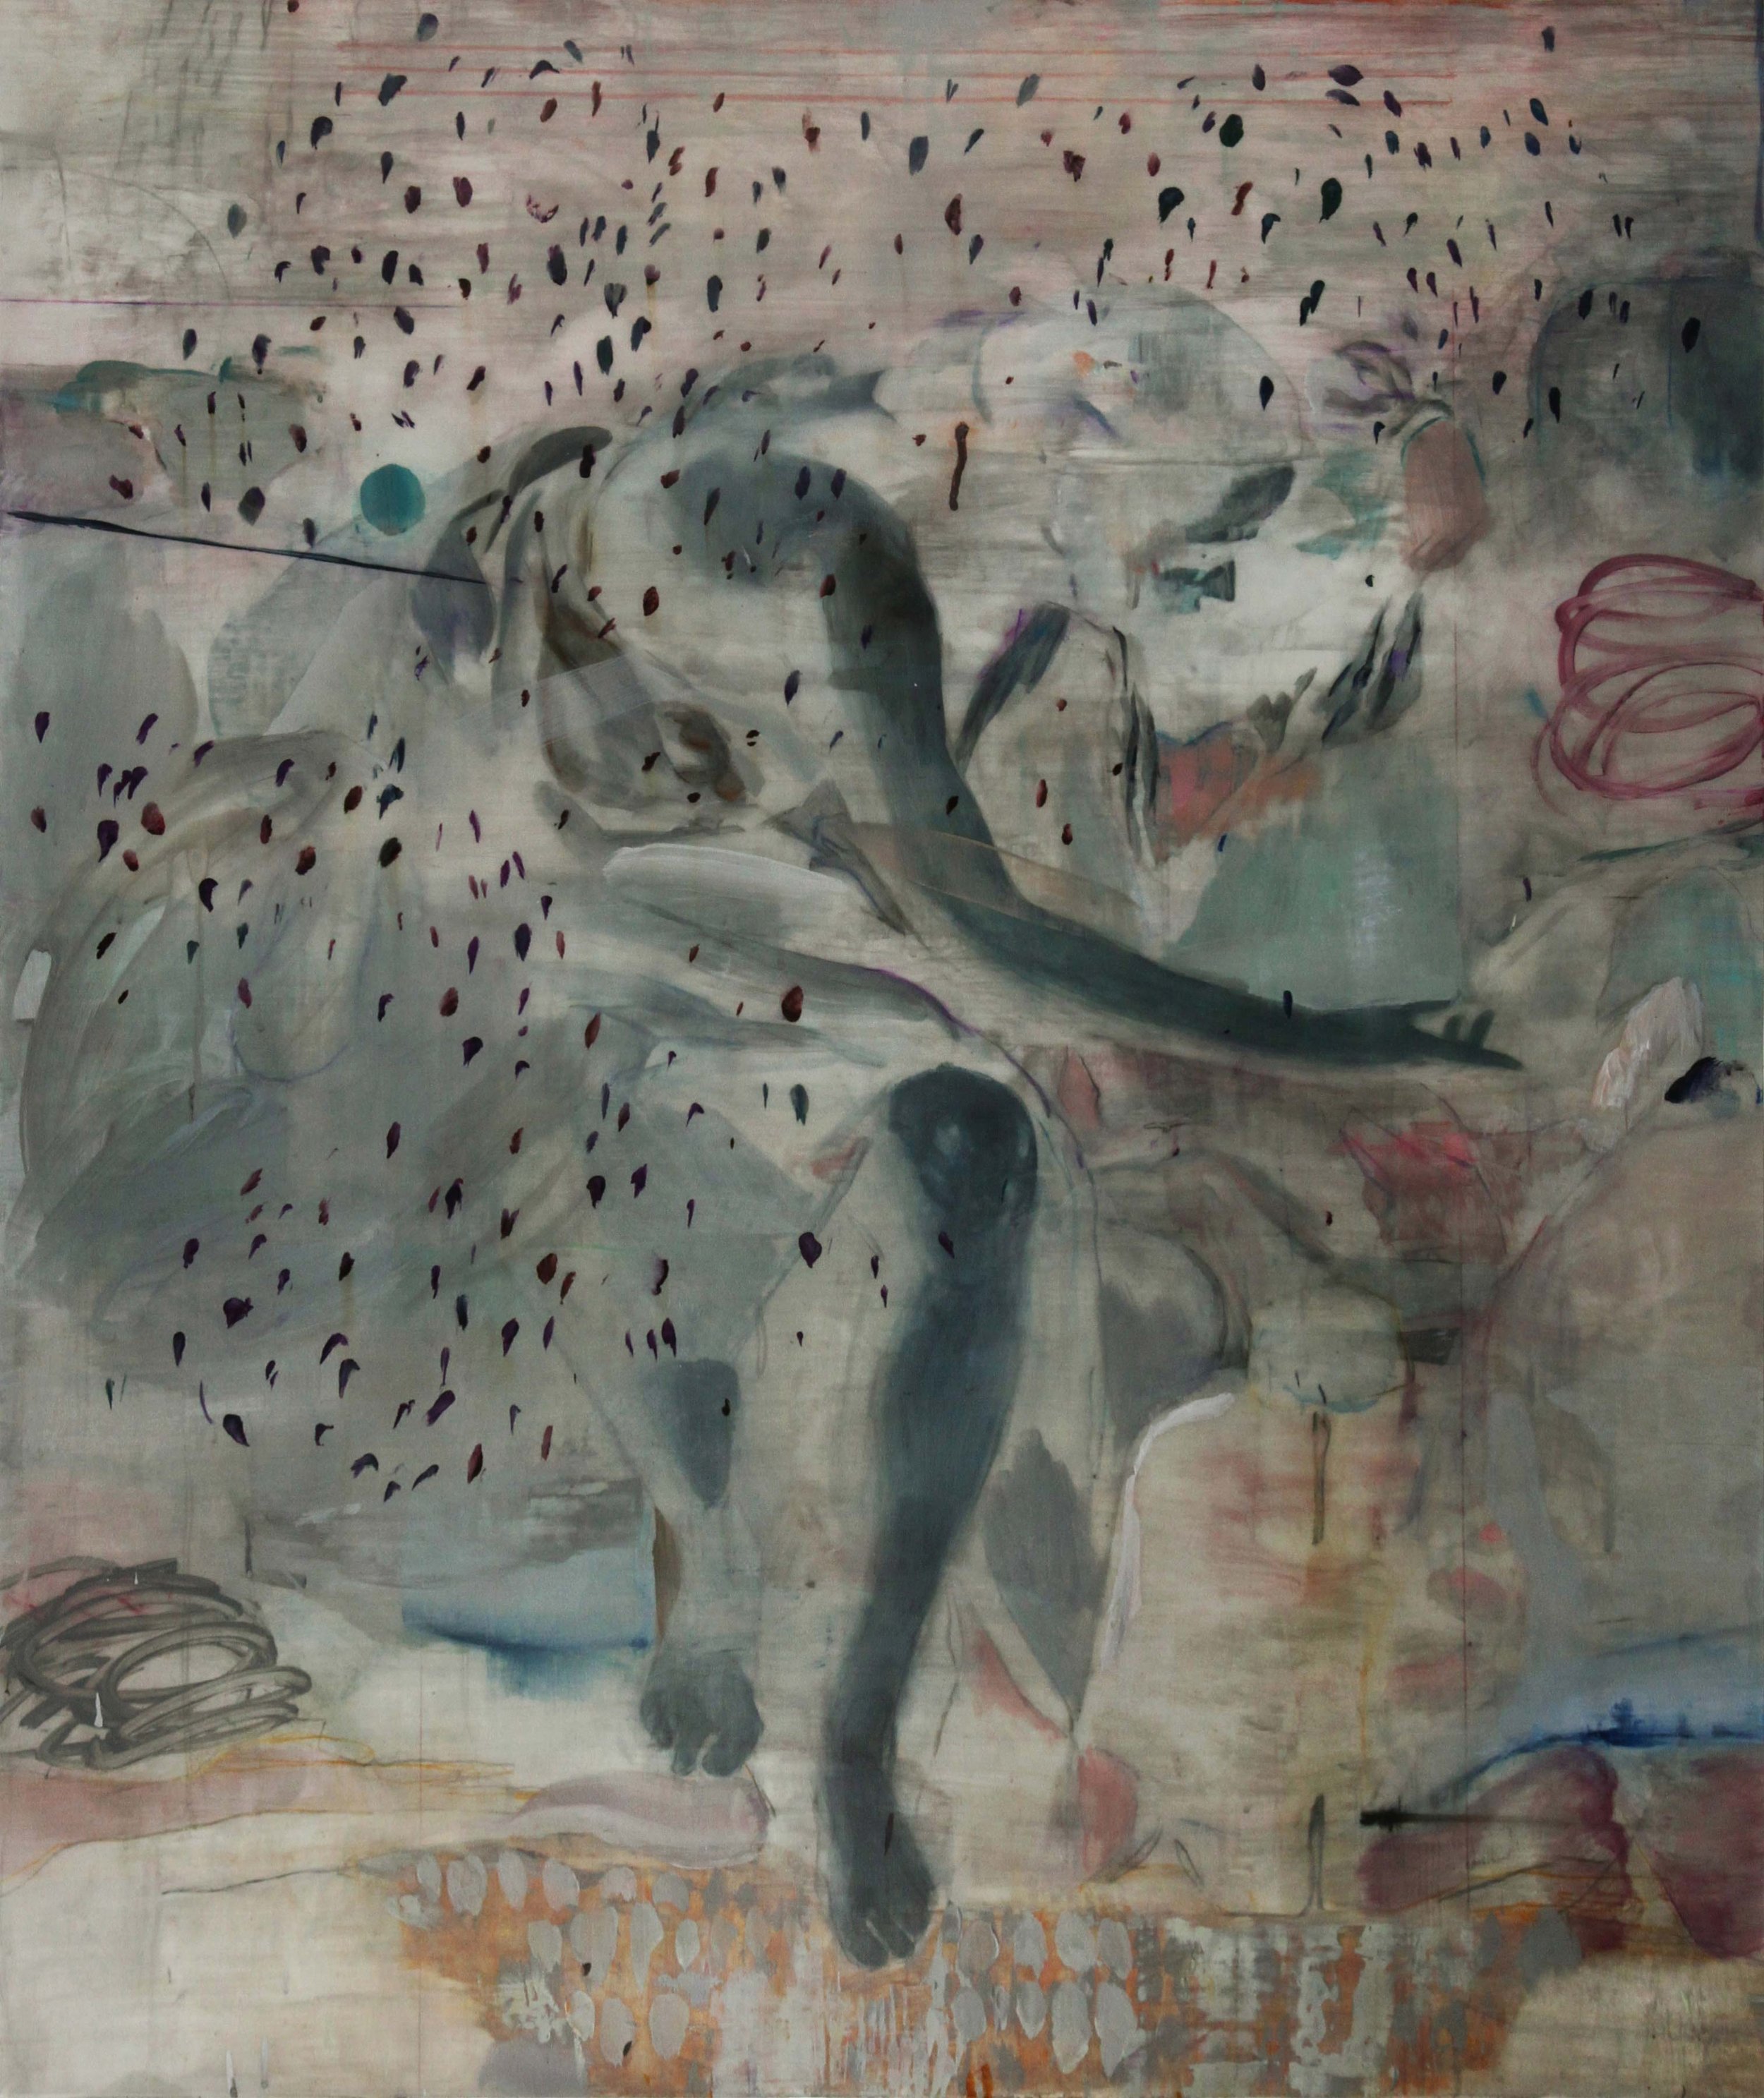   Courtship display (after Cavallino)  2021, Mixed media on polyester film 102 x 85 cm 